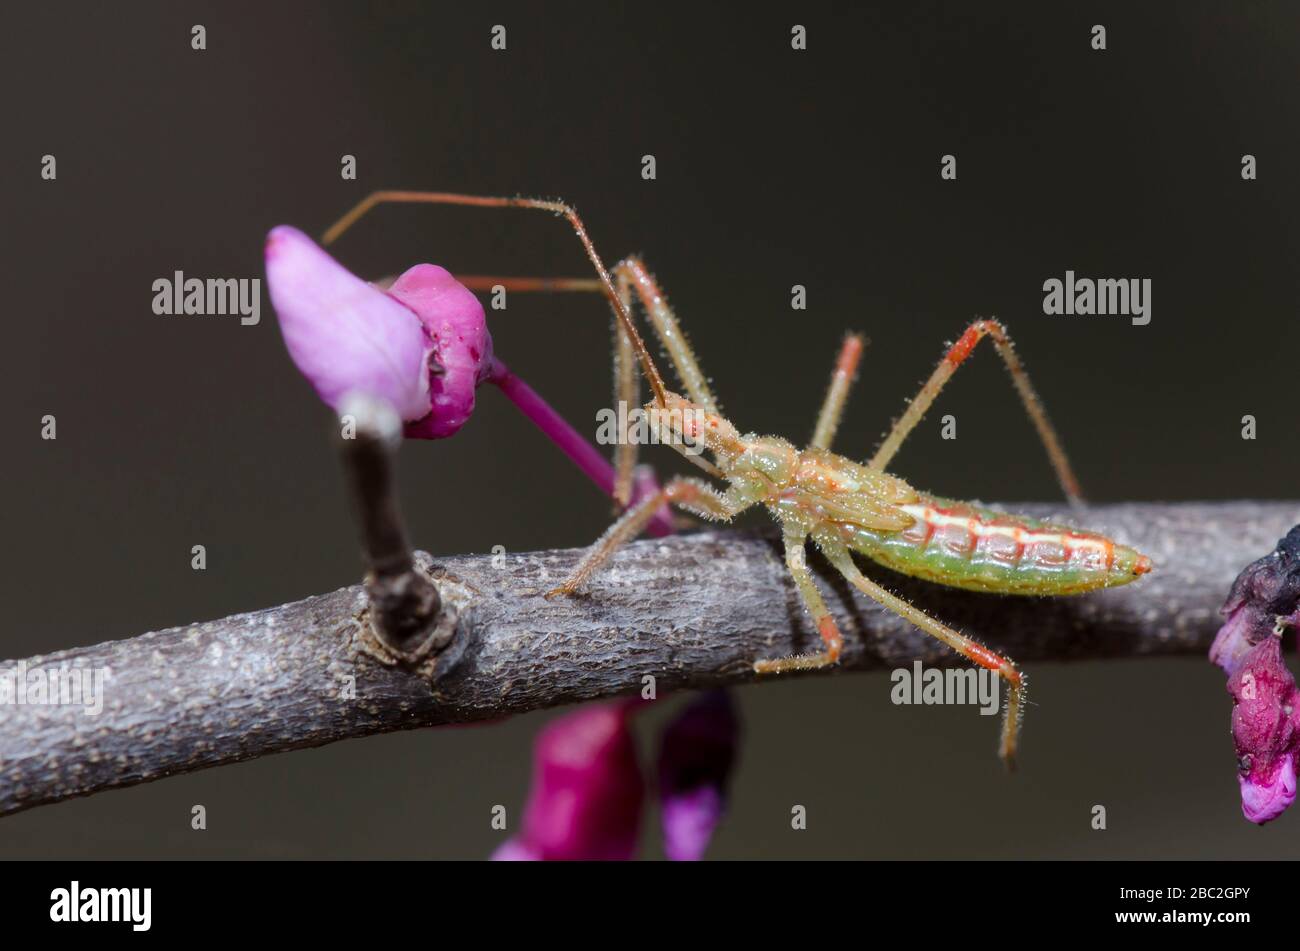 Assassin Bug, Zelus luridus, nymph lurking in Eastern Redbud, Cercis canadensis, blossoms Stock Photo